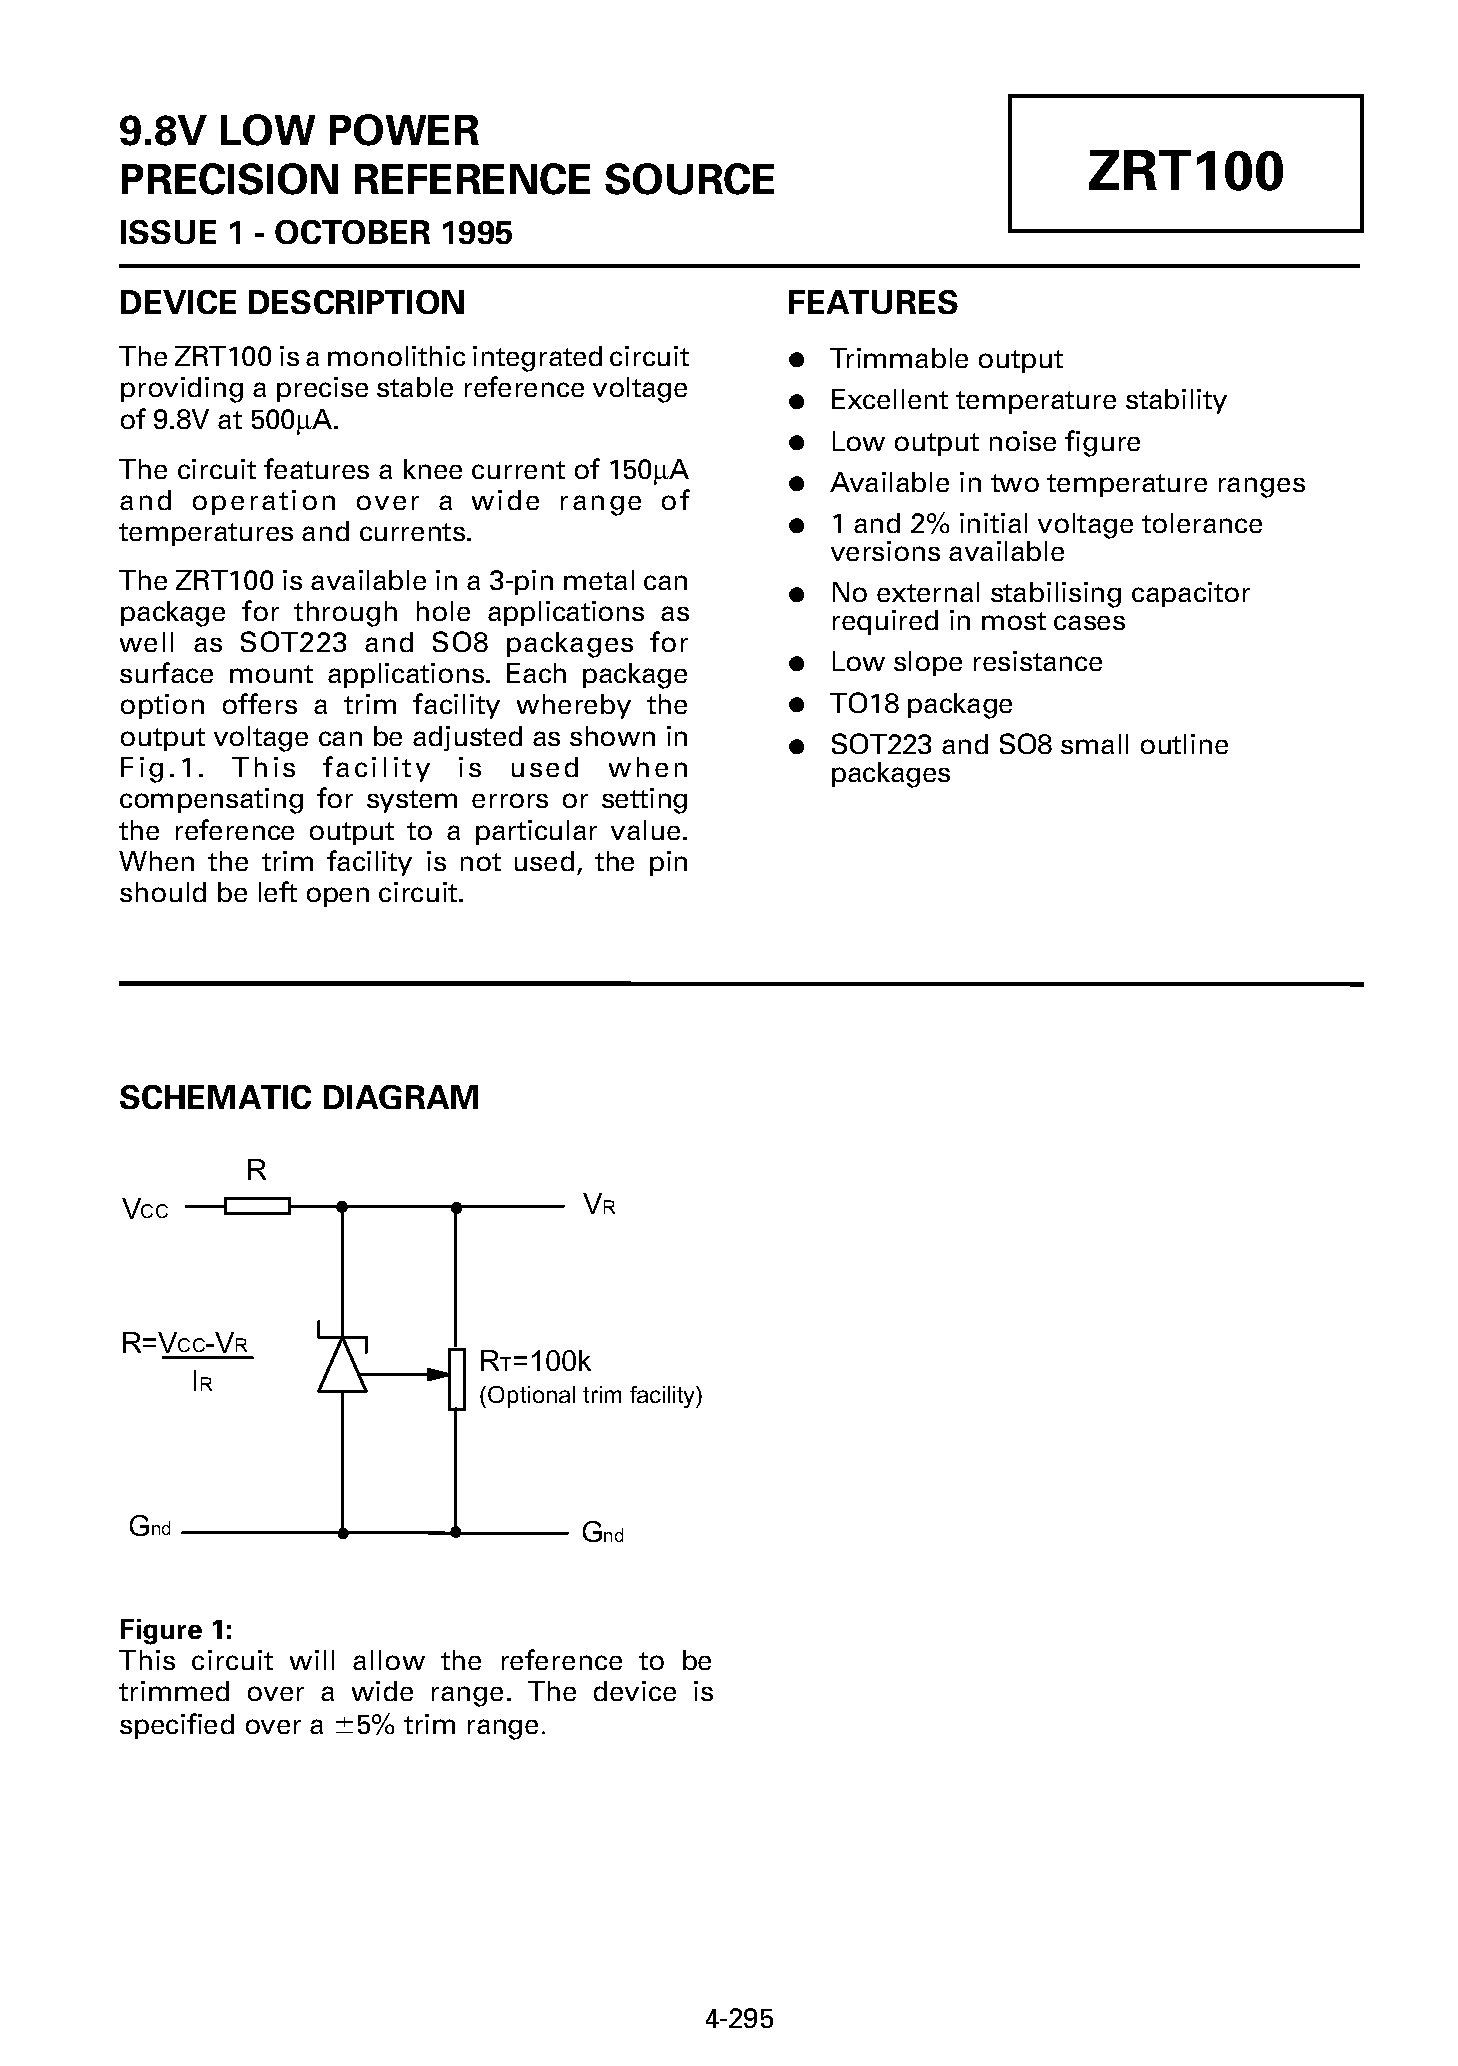 Datasheet ZRT100 - 9.8V LOW POWER PRECISION REFERENCE SOURCE page 1